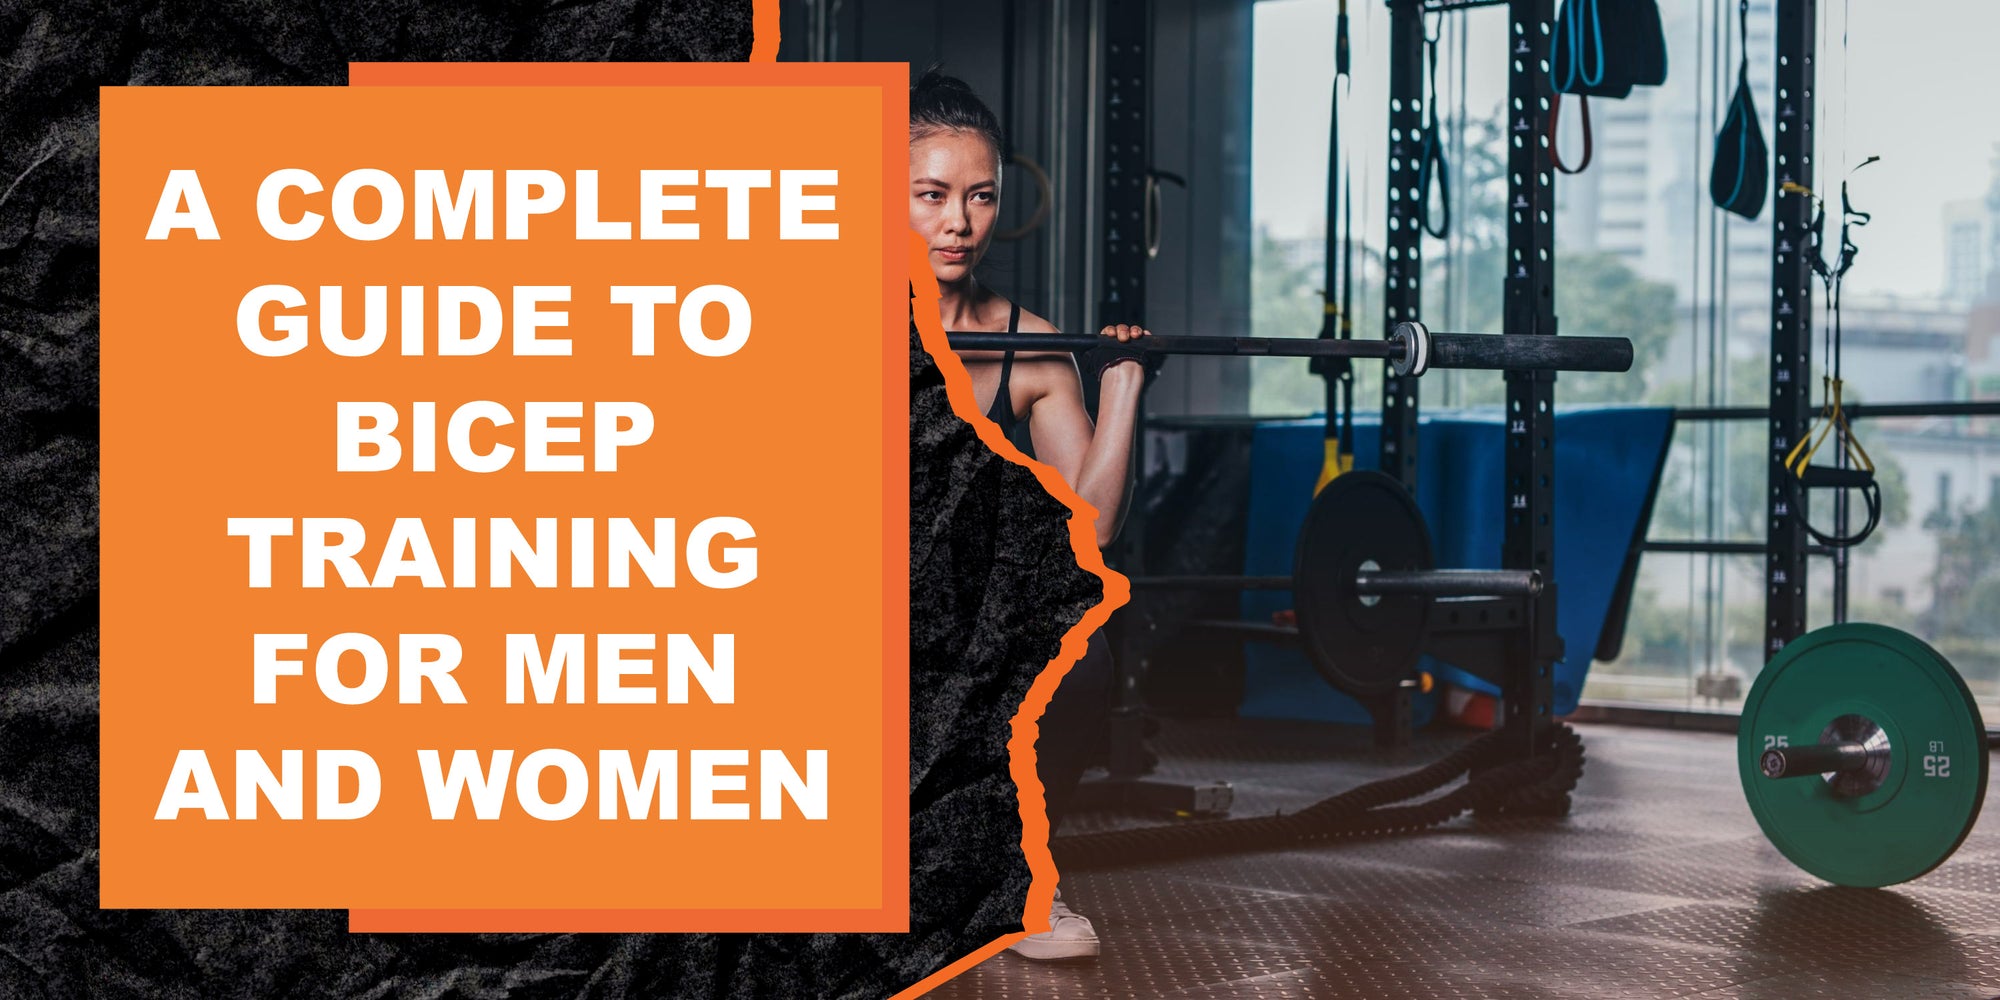 A Complete Guide to Bicep Training for Men and Women